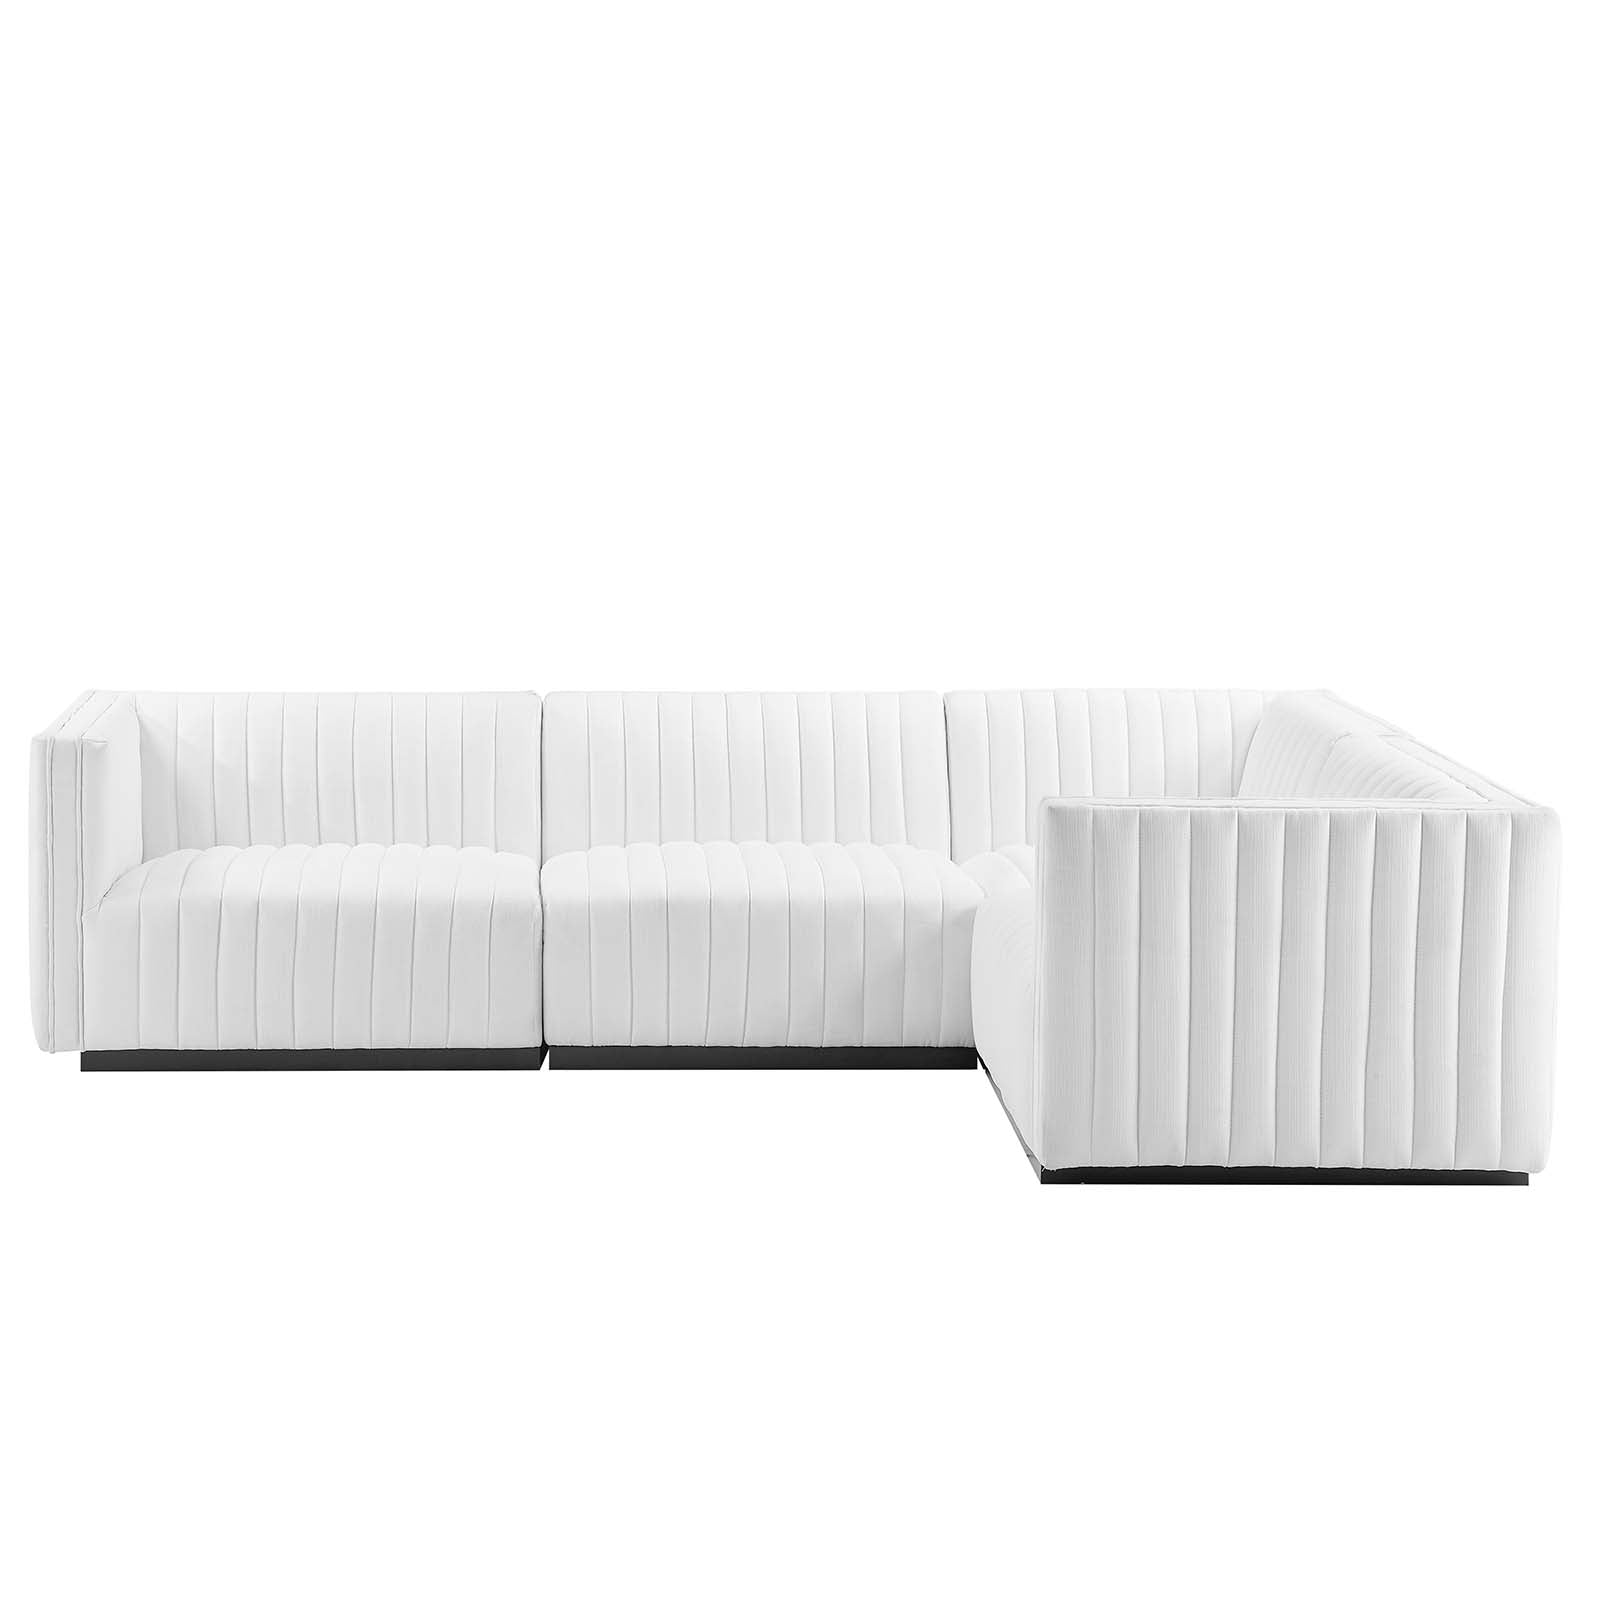 Modway Sectional Sofas - Conjure Channel Tufted Upholstered Fabric 4-Piece L-Shaped Sectional Black White